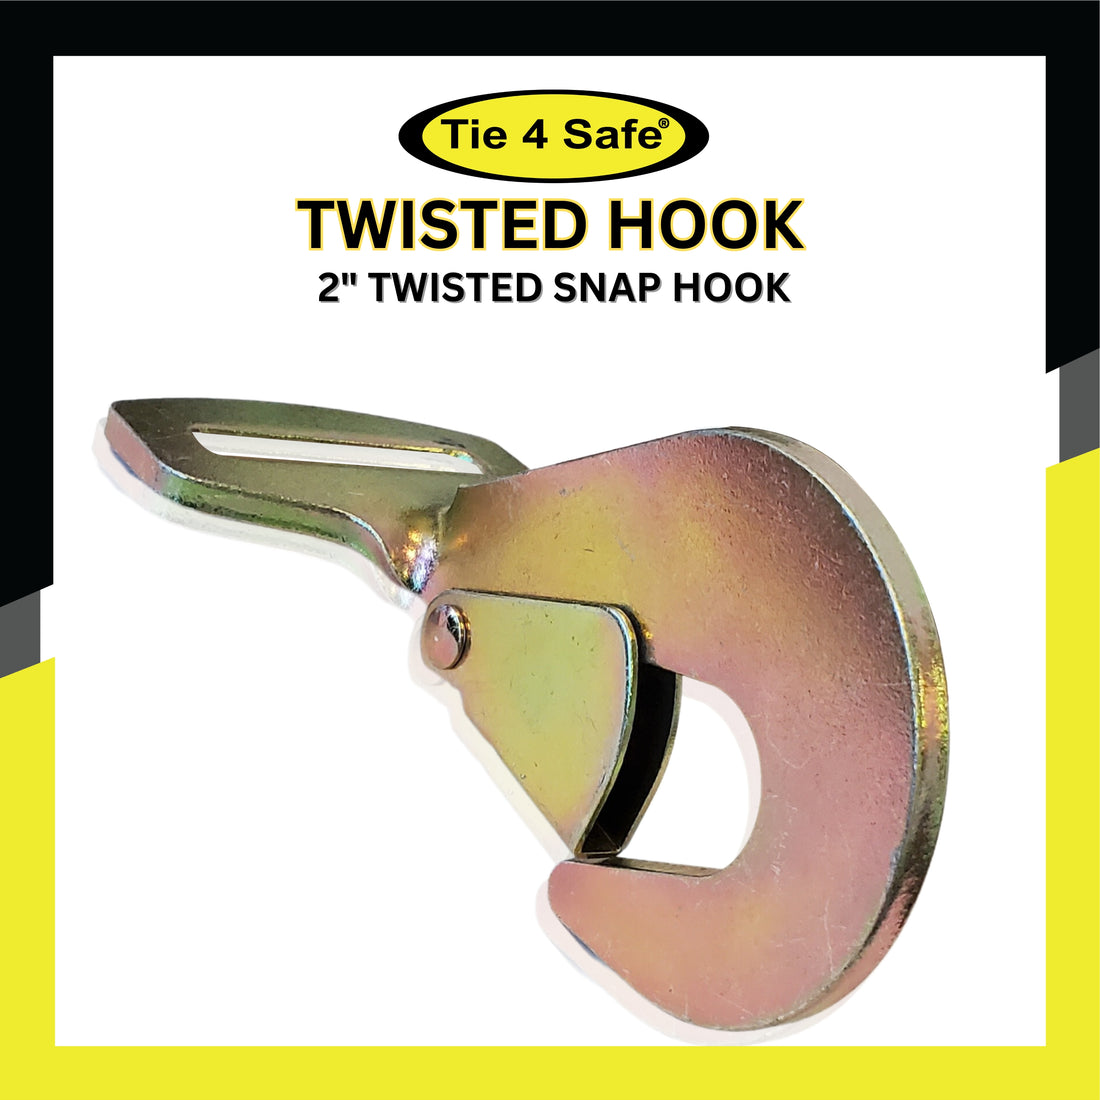 2 Twisted Snap Hook – Tie 4 Safe